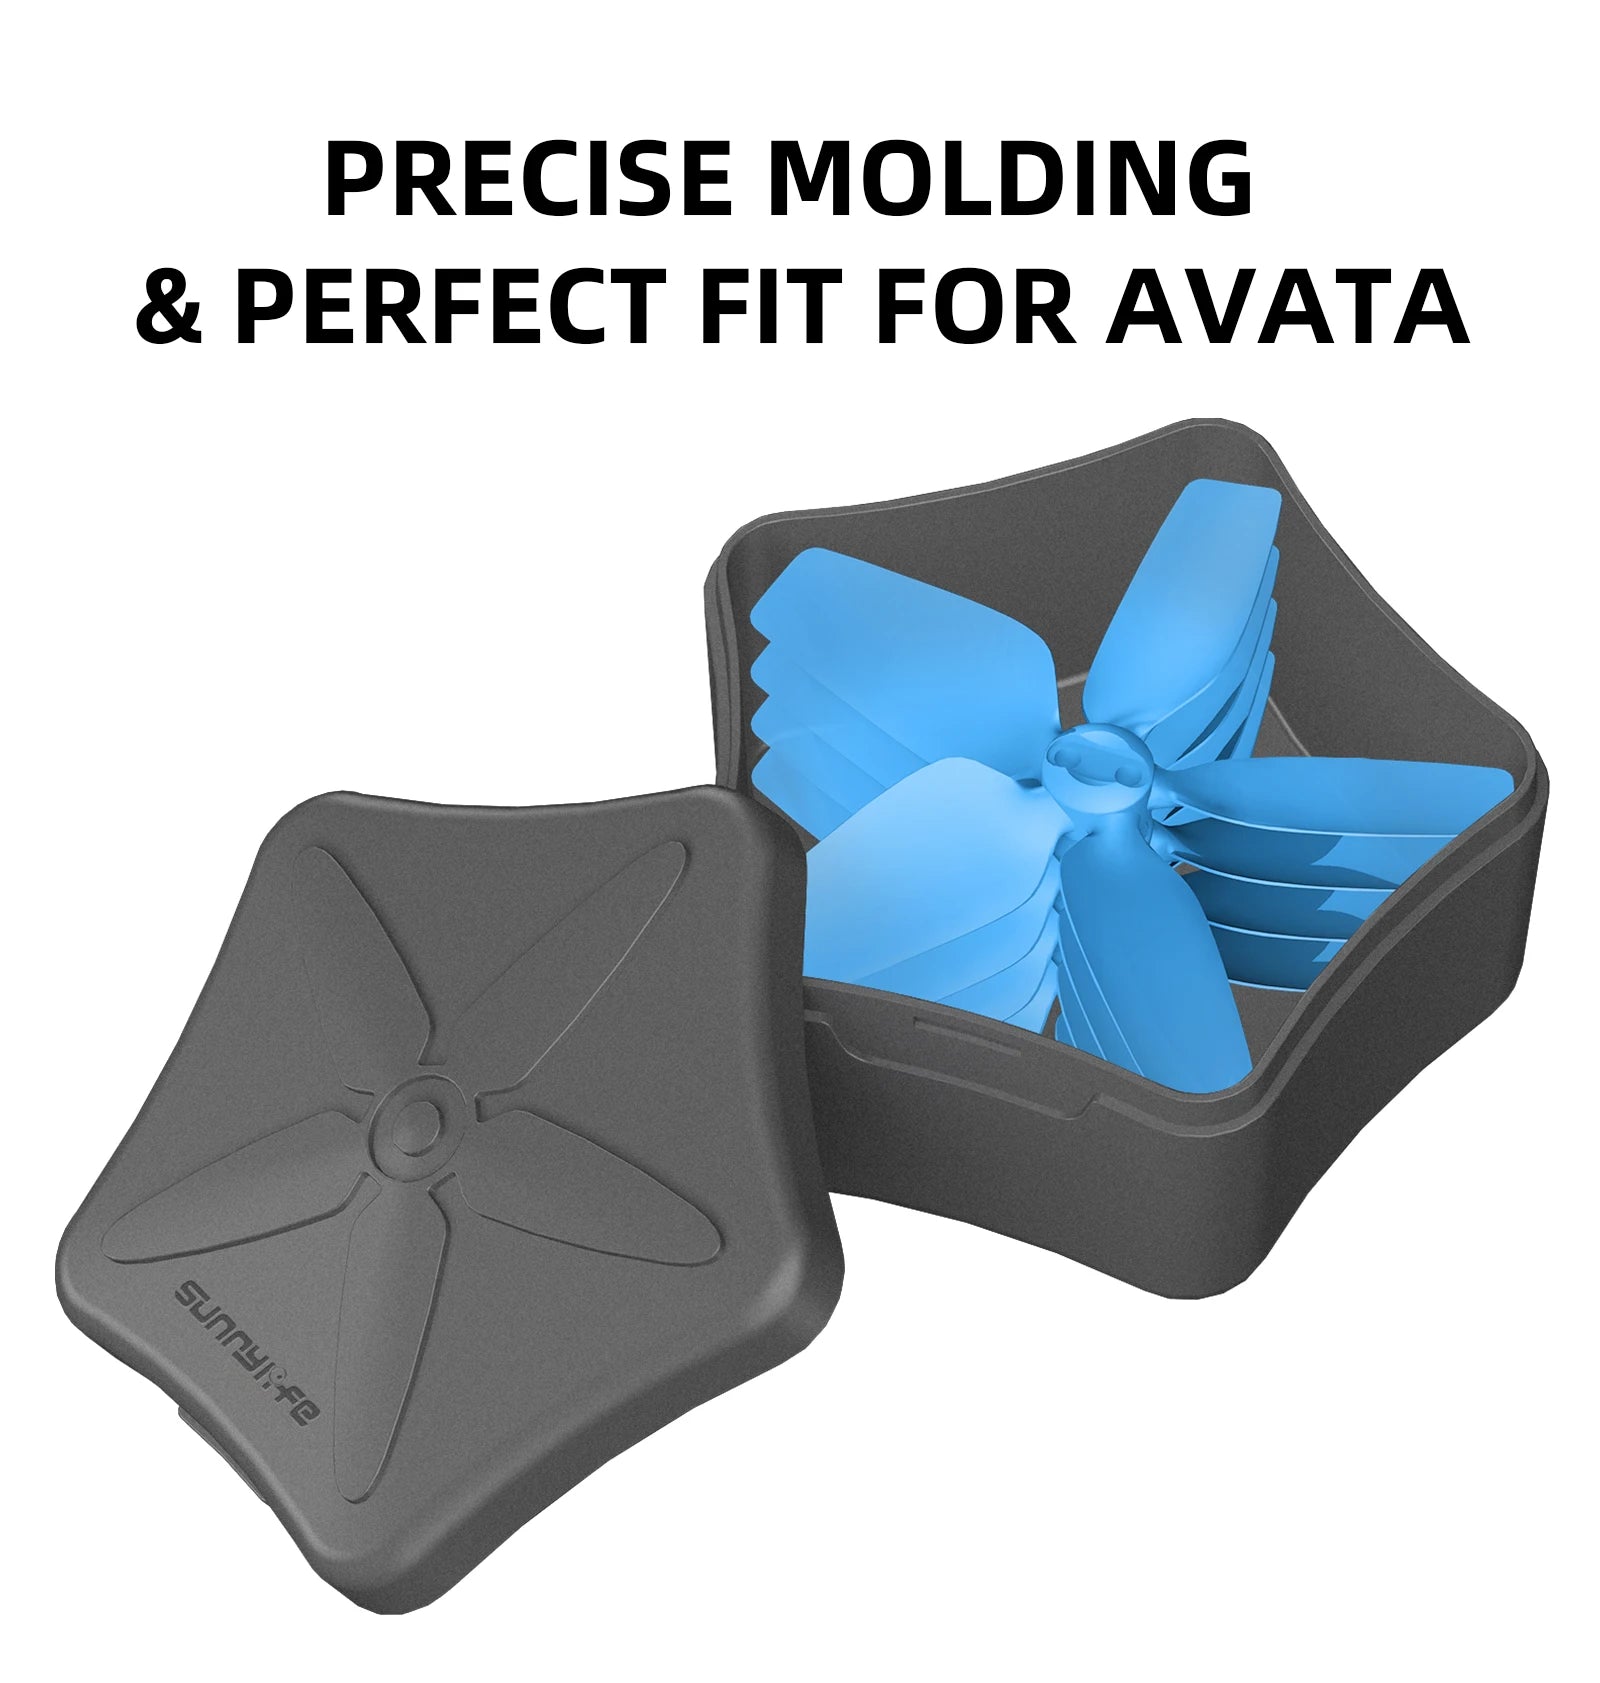 PRECISE MOLDING & PERFECT FIT FOR AVATA